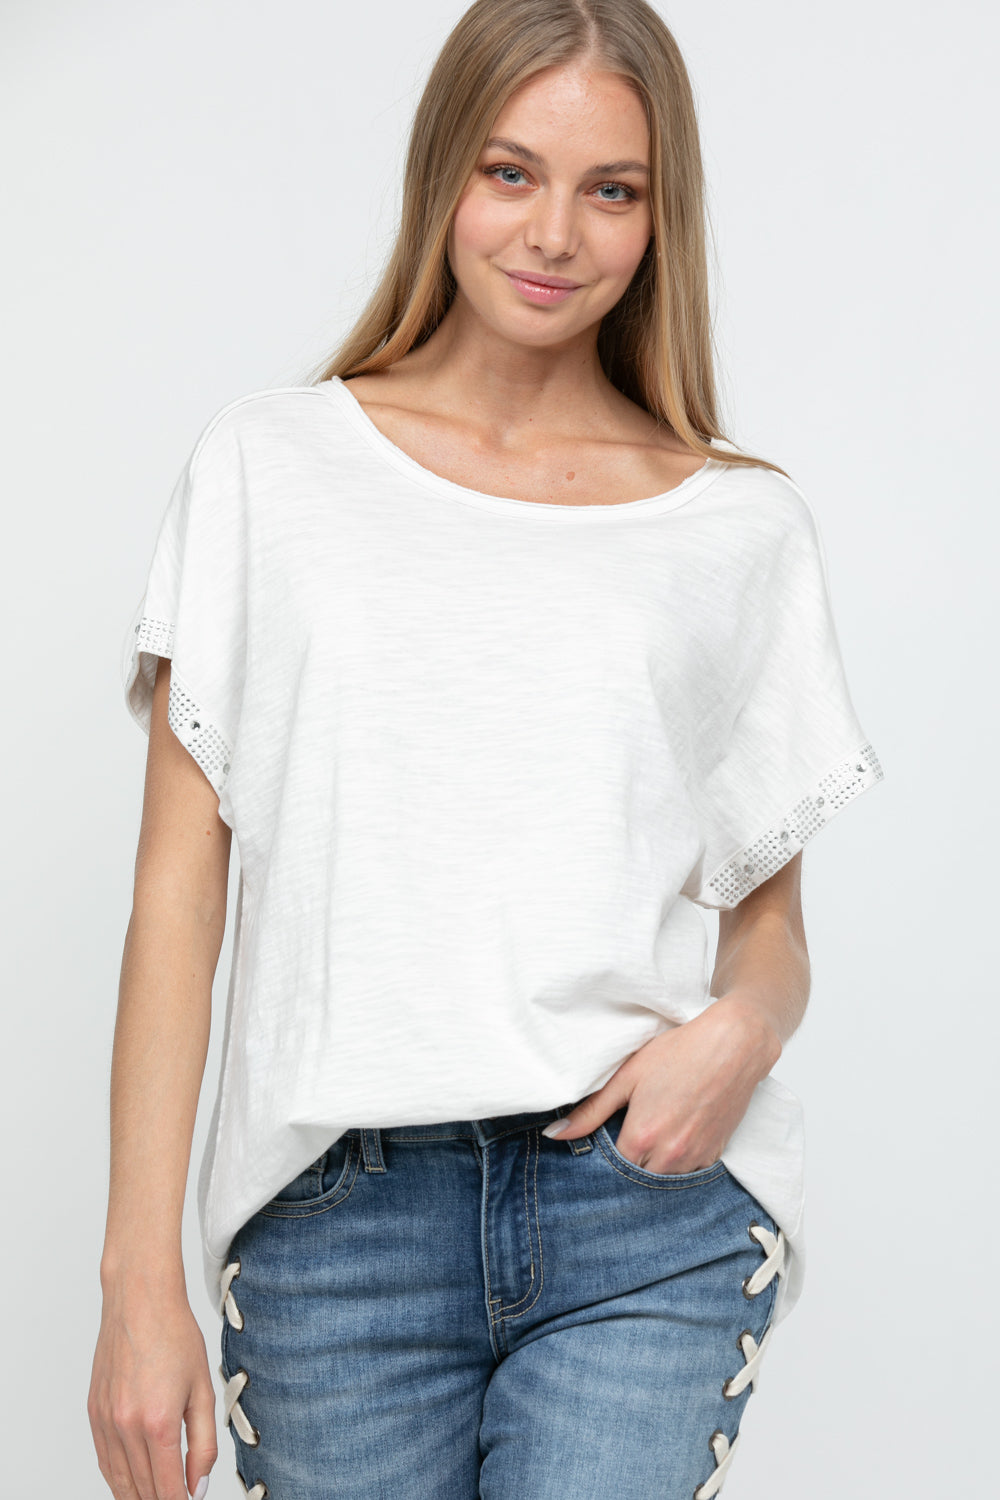 Ivory Ballet Neck Top with Rhinestone Sleeve Detail